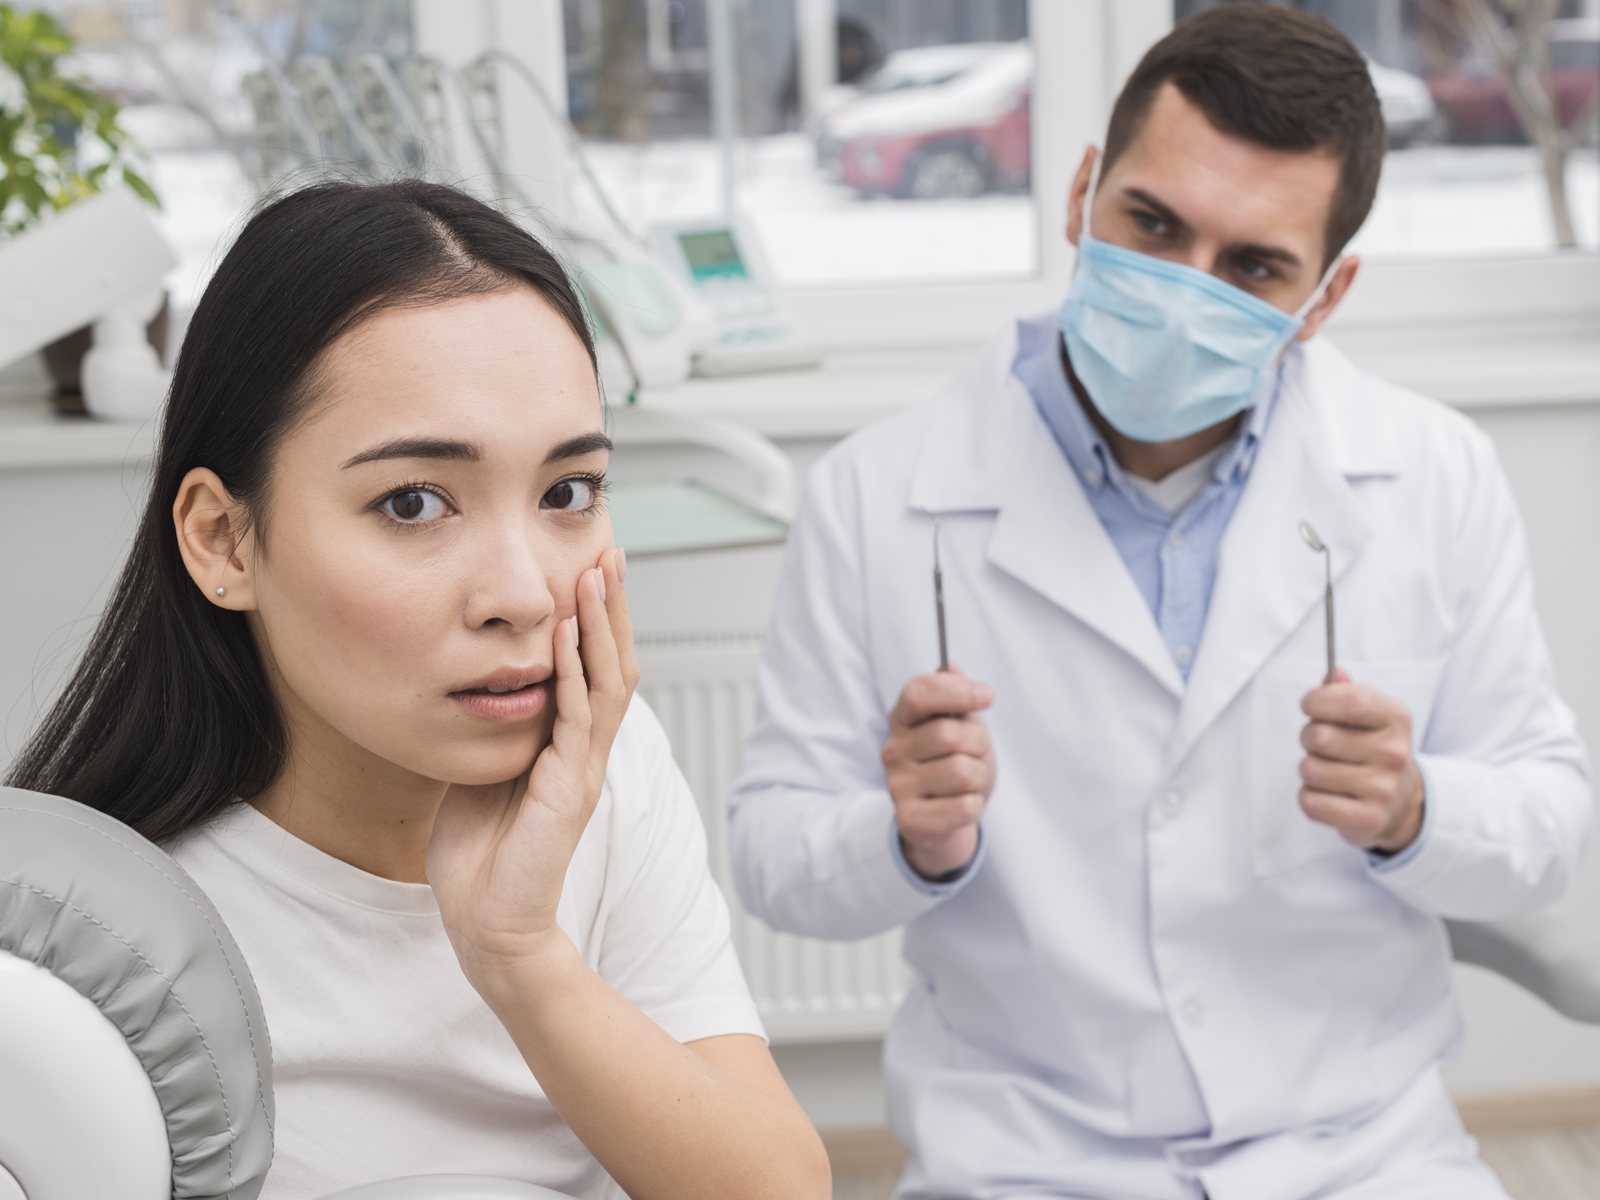 How to Deal with Anxiety at the Dentist